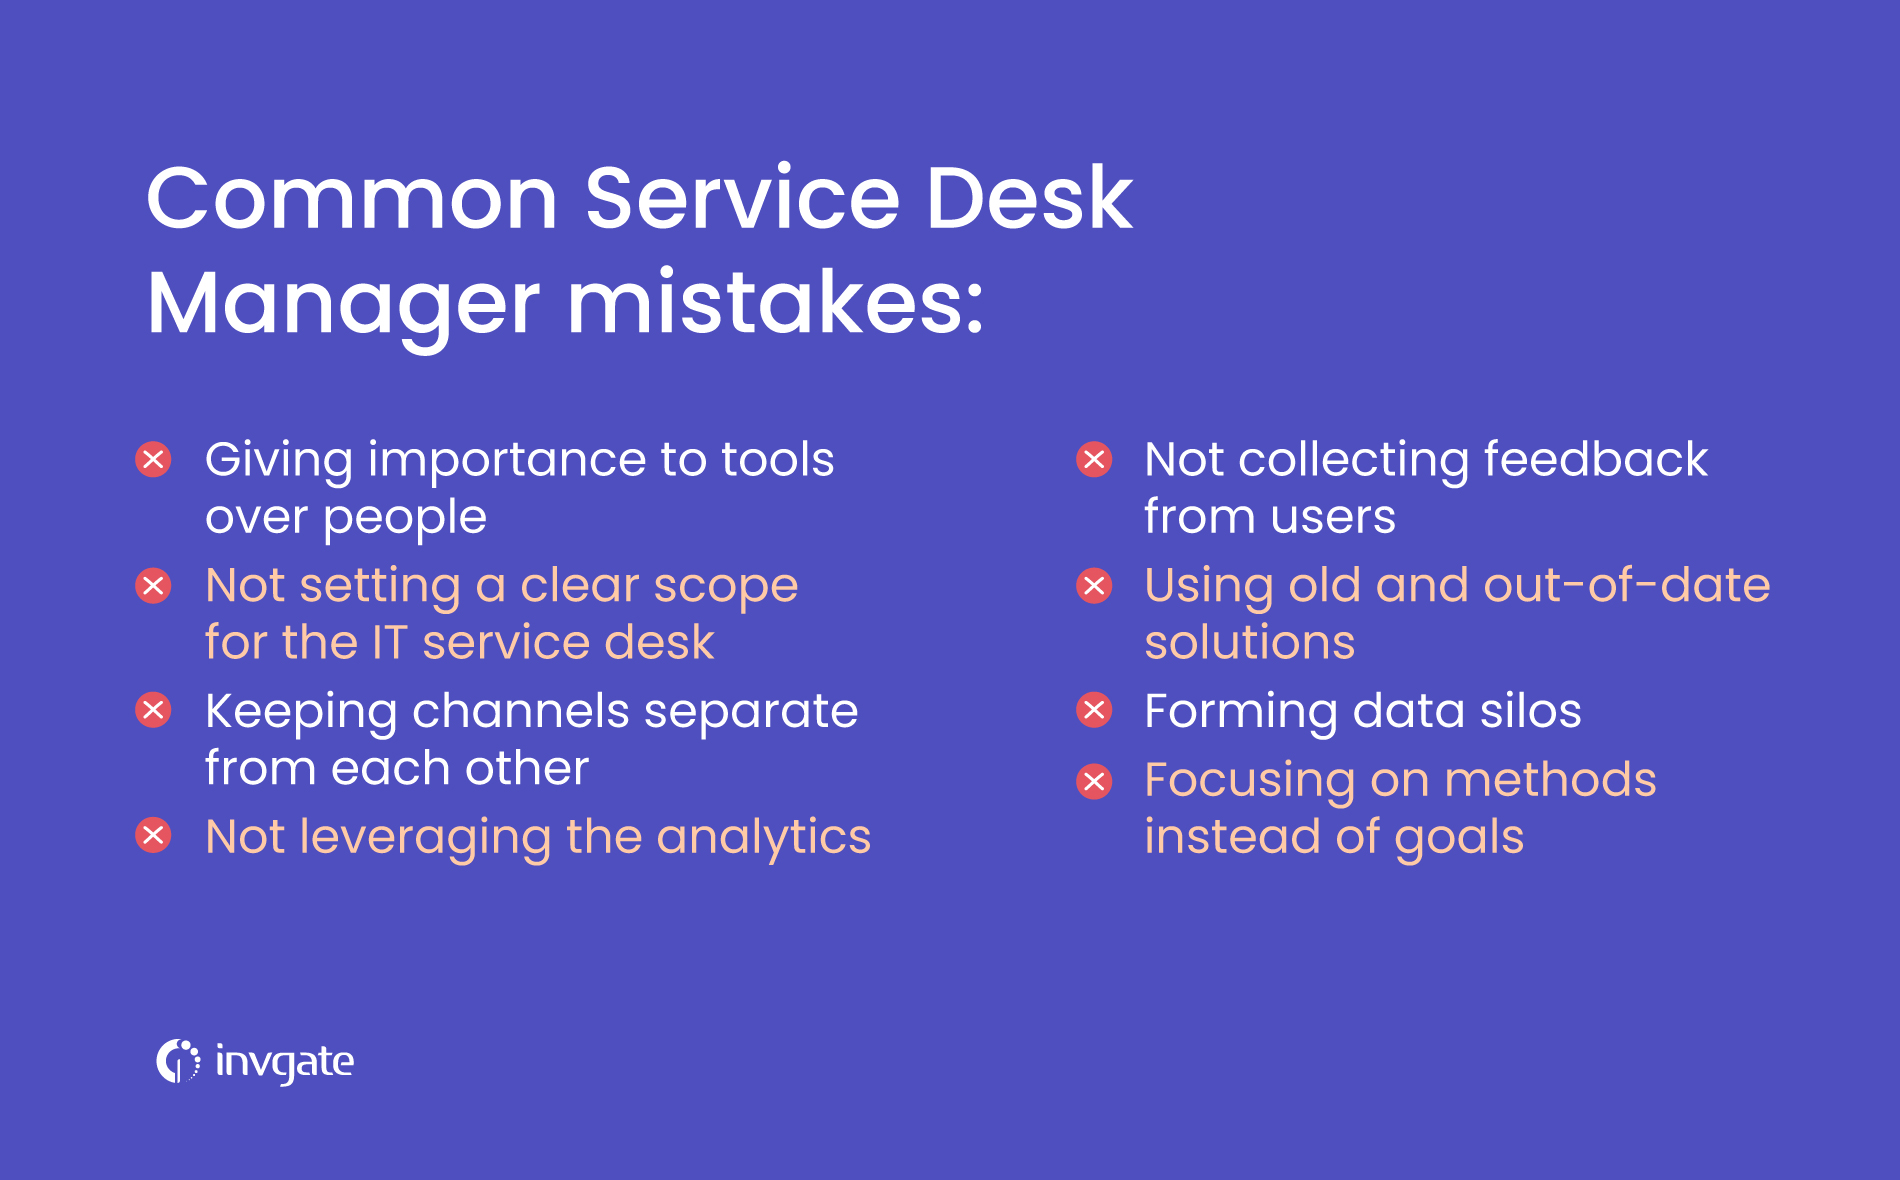 Common service desk manager mistakes